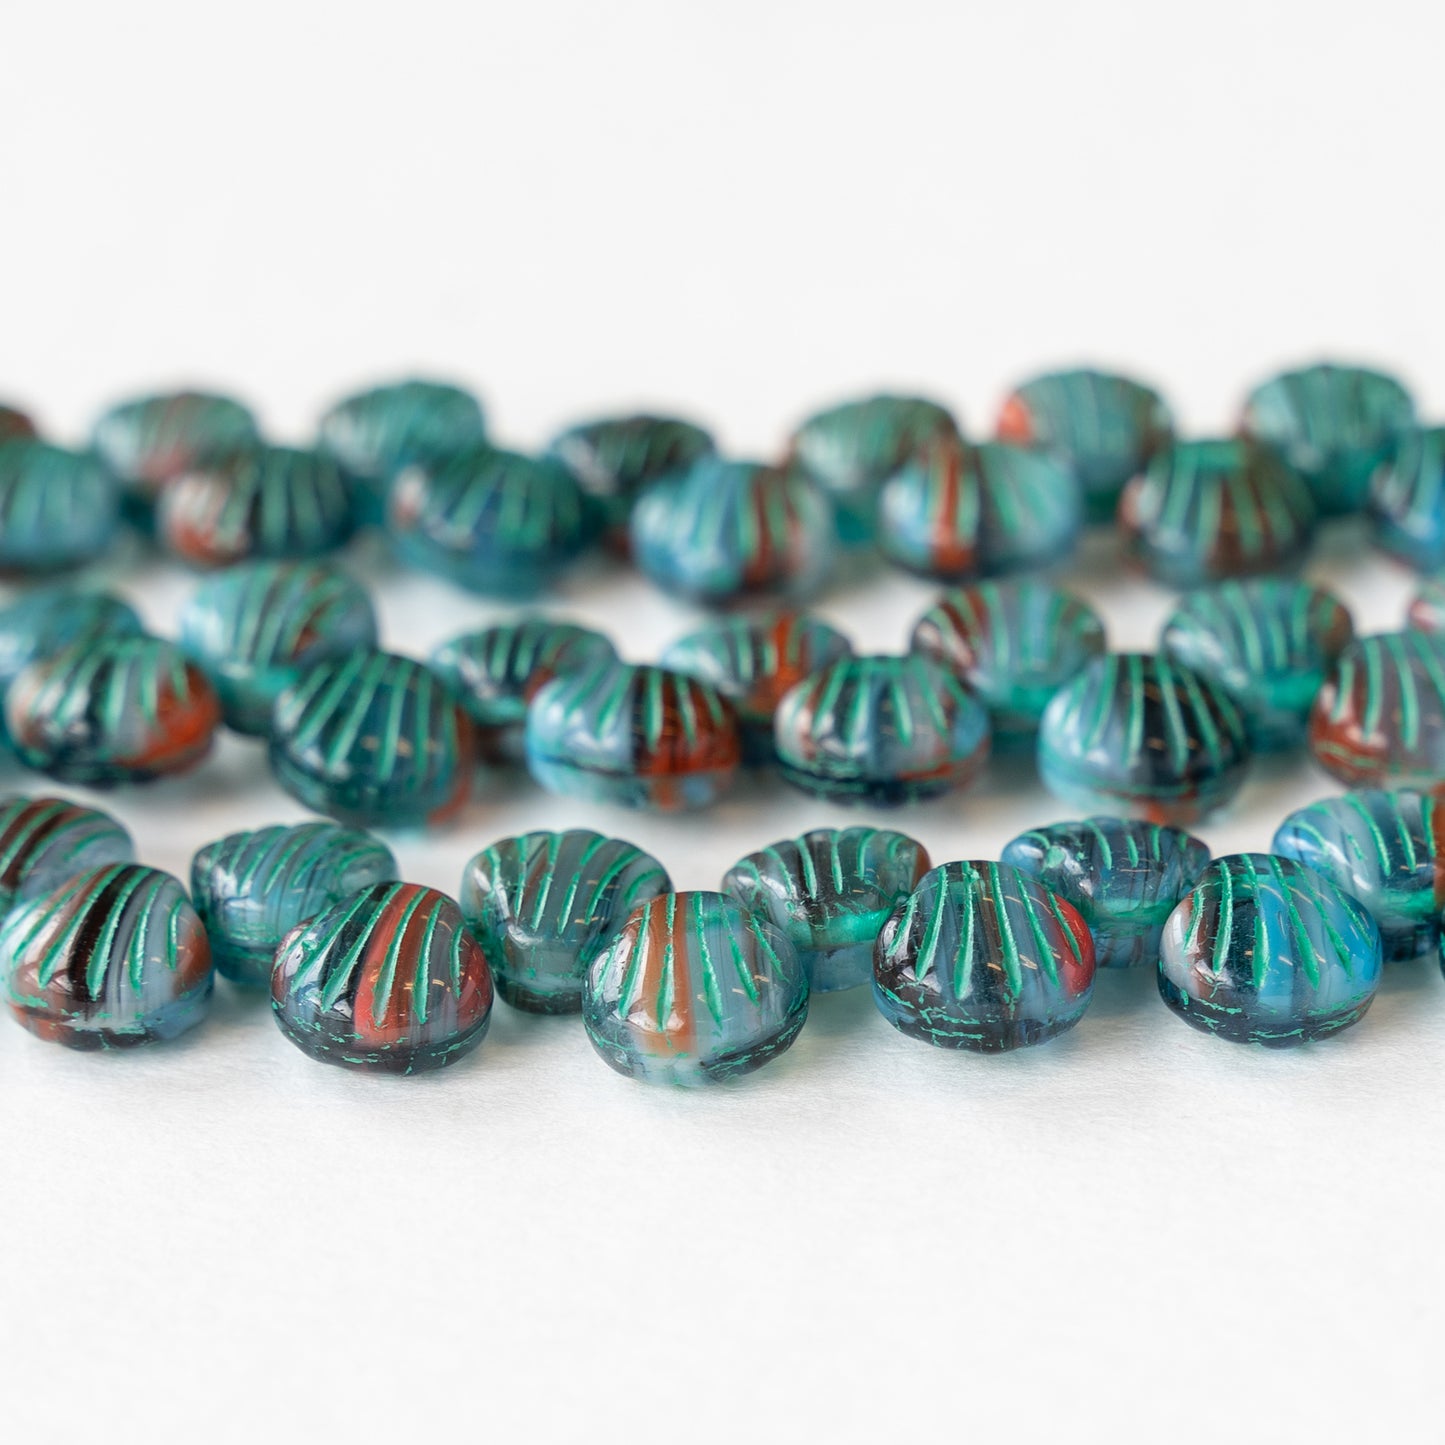 9mm Glass Scallop Beads - Marbled Blue and Amber - 20 Beads